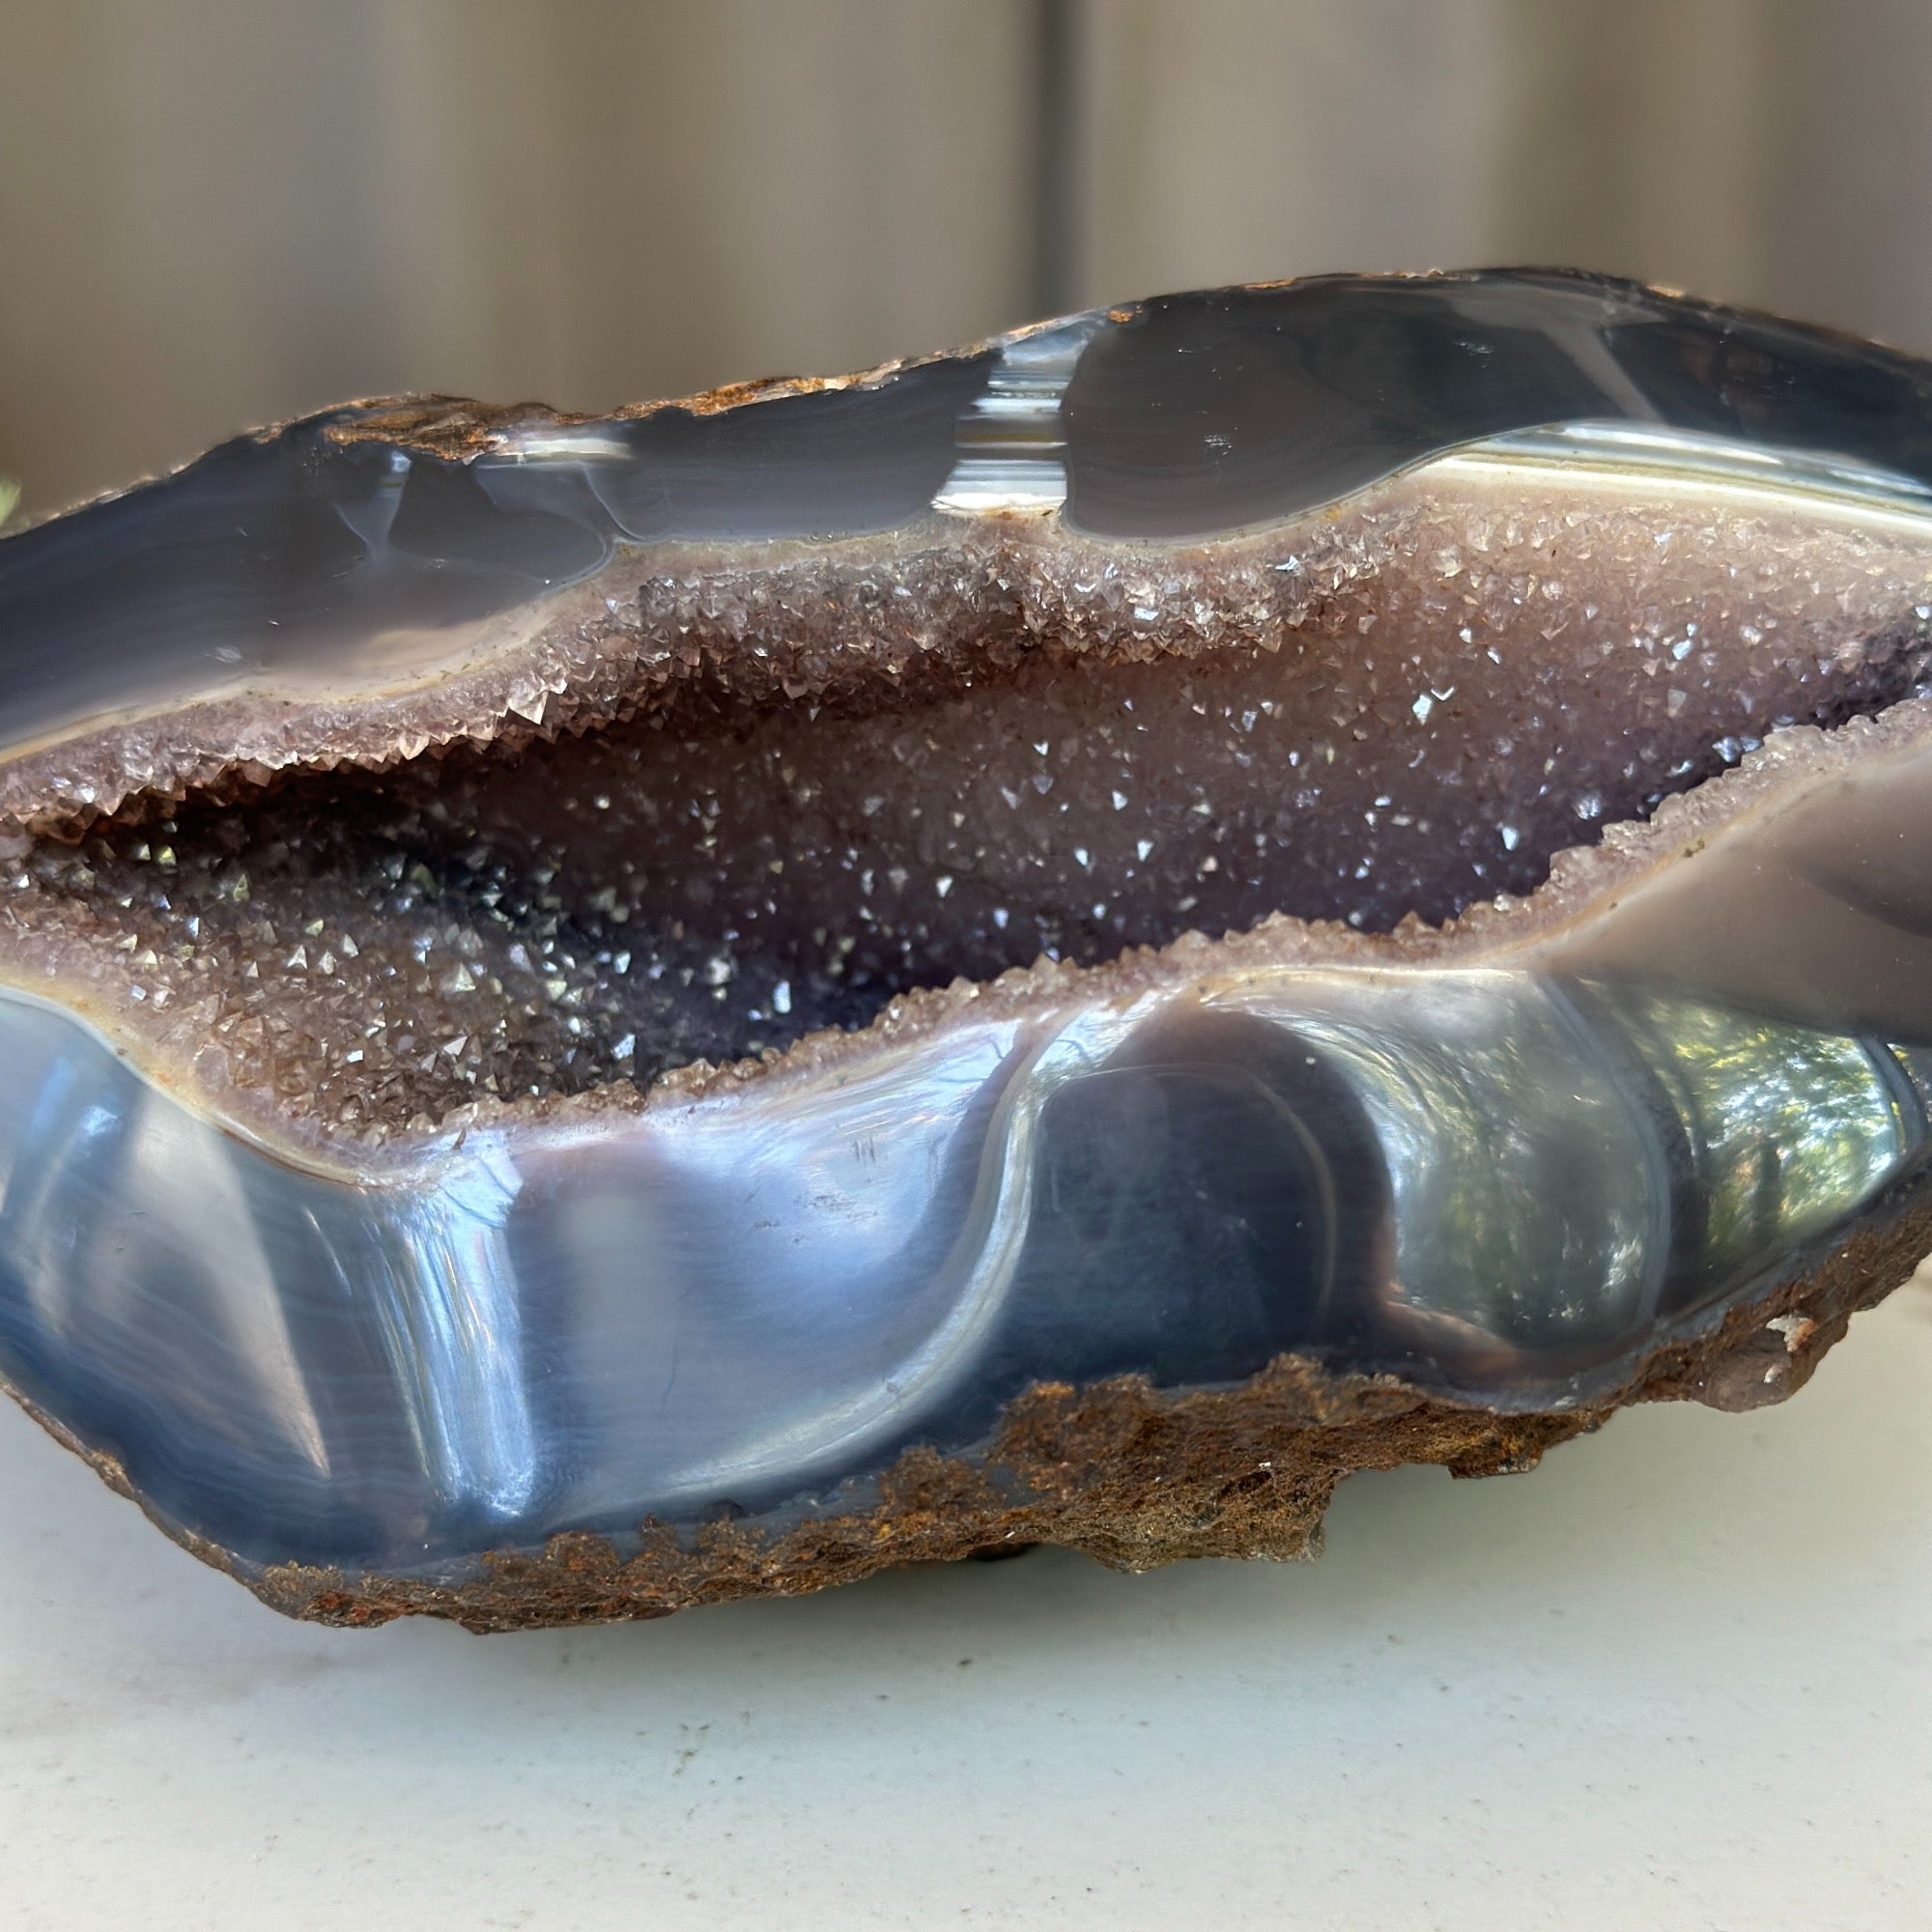 Statement Amethyst Cave Geode formation for Large Spaces (3.4 lb - 1.5 Kg), Extra large Cluster